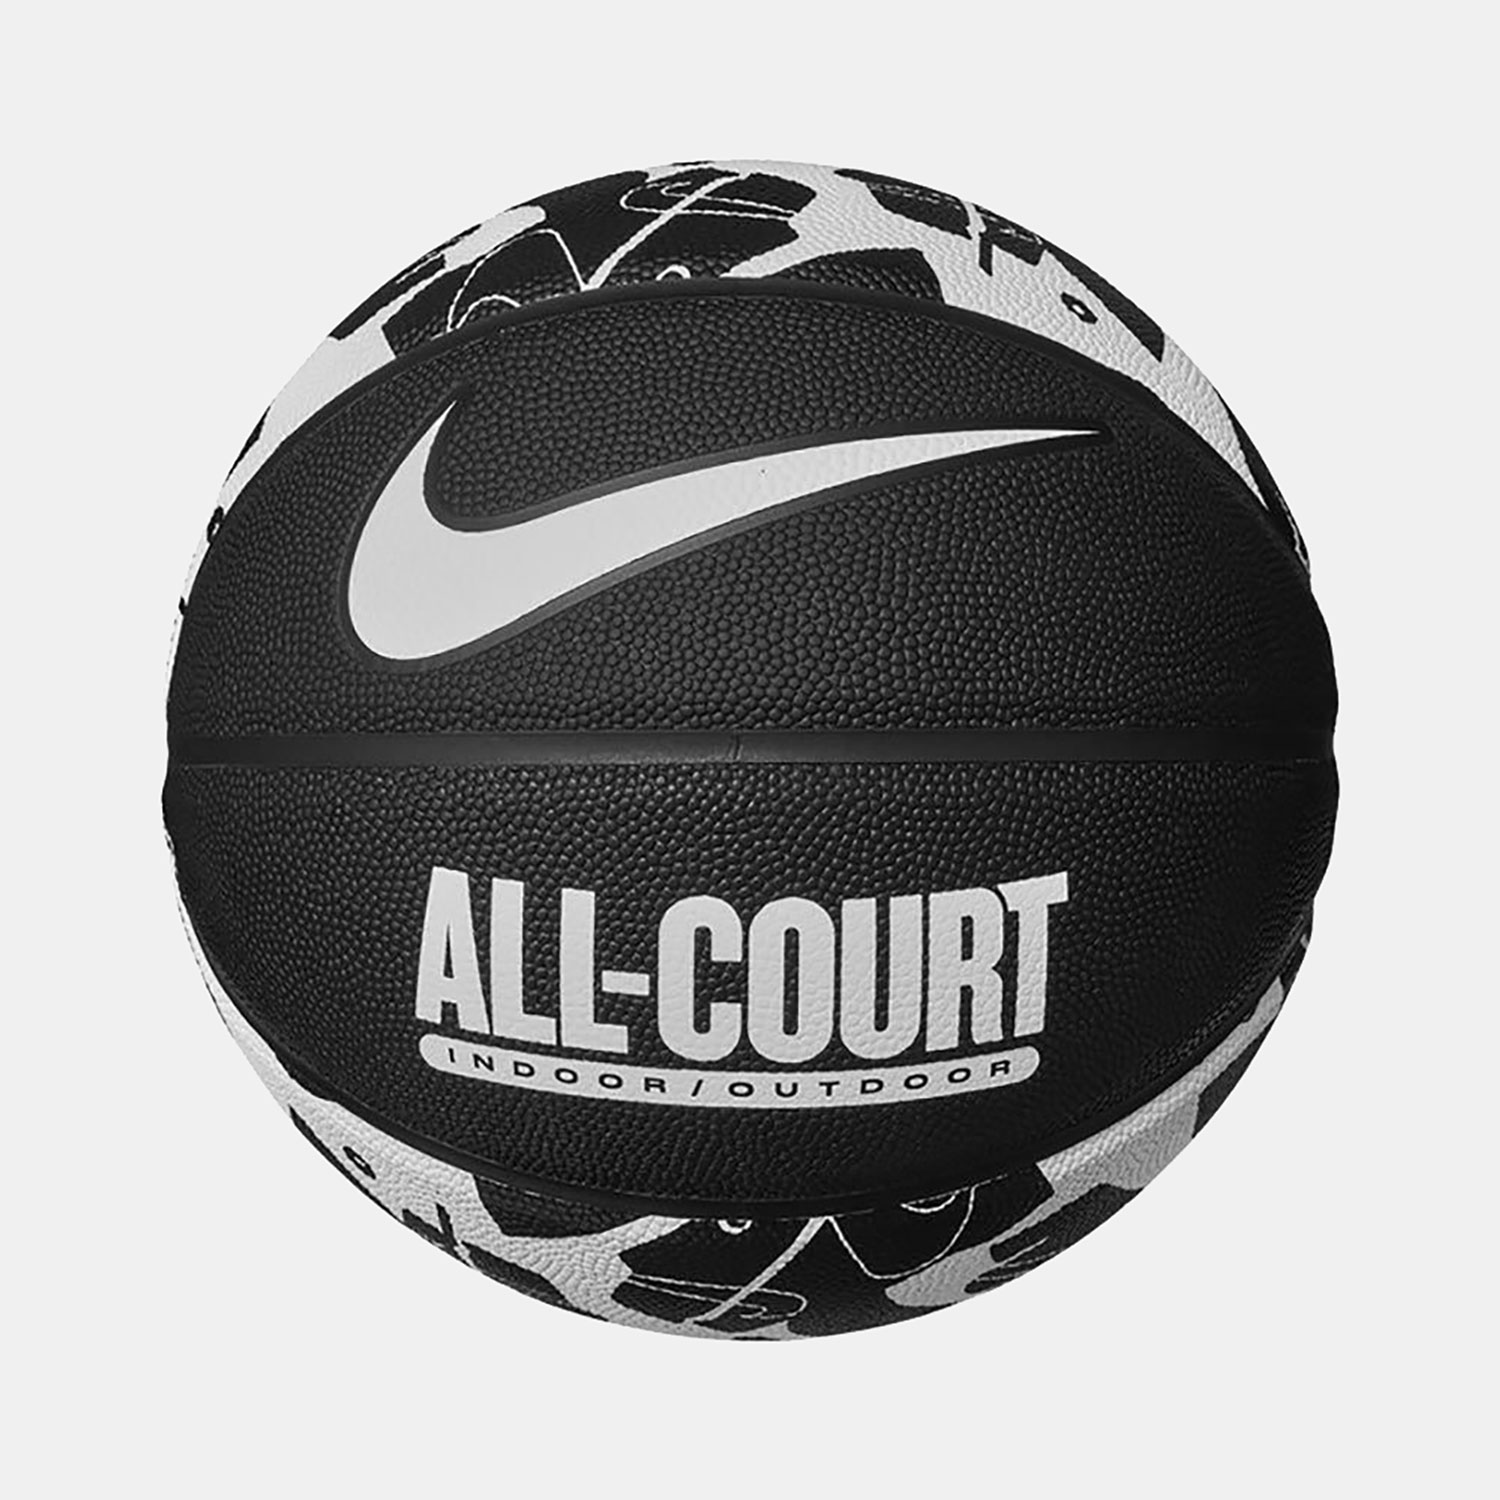 NIKE EVERYDAY ALL COURT 8P GRAPHIC BASKET BALL ΜΑΥΡΟ